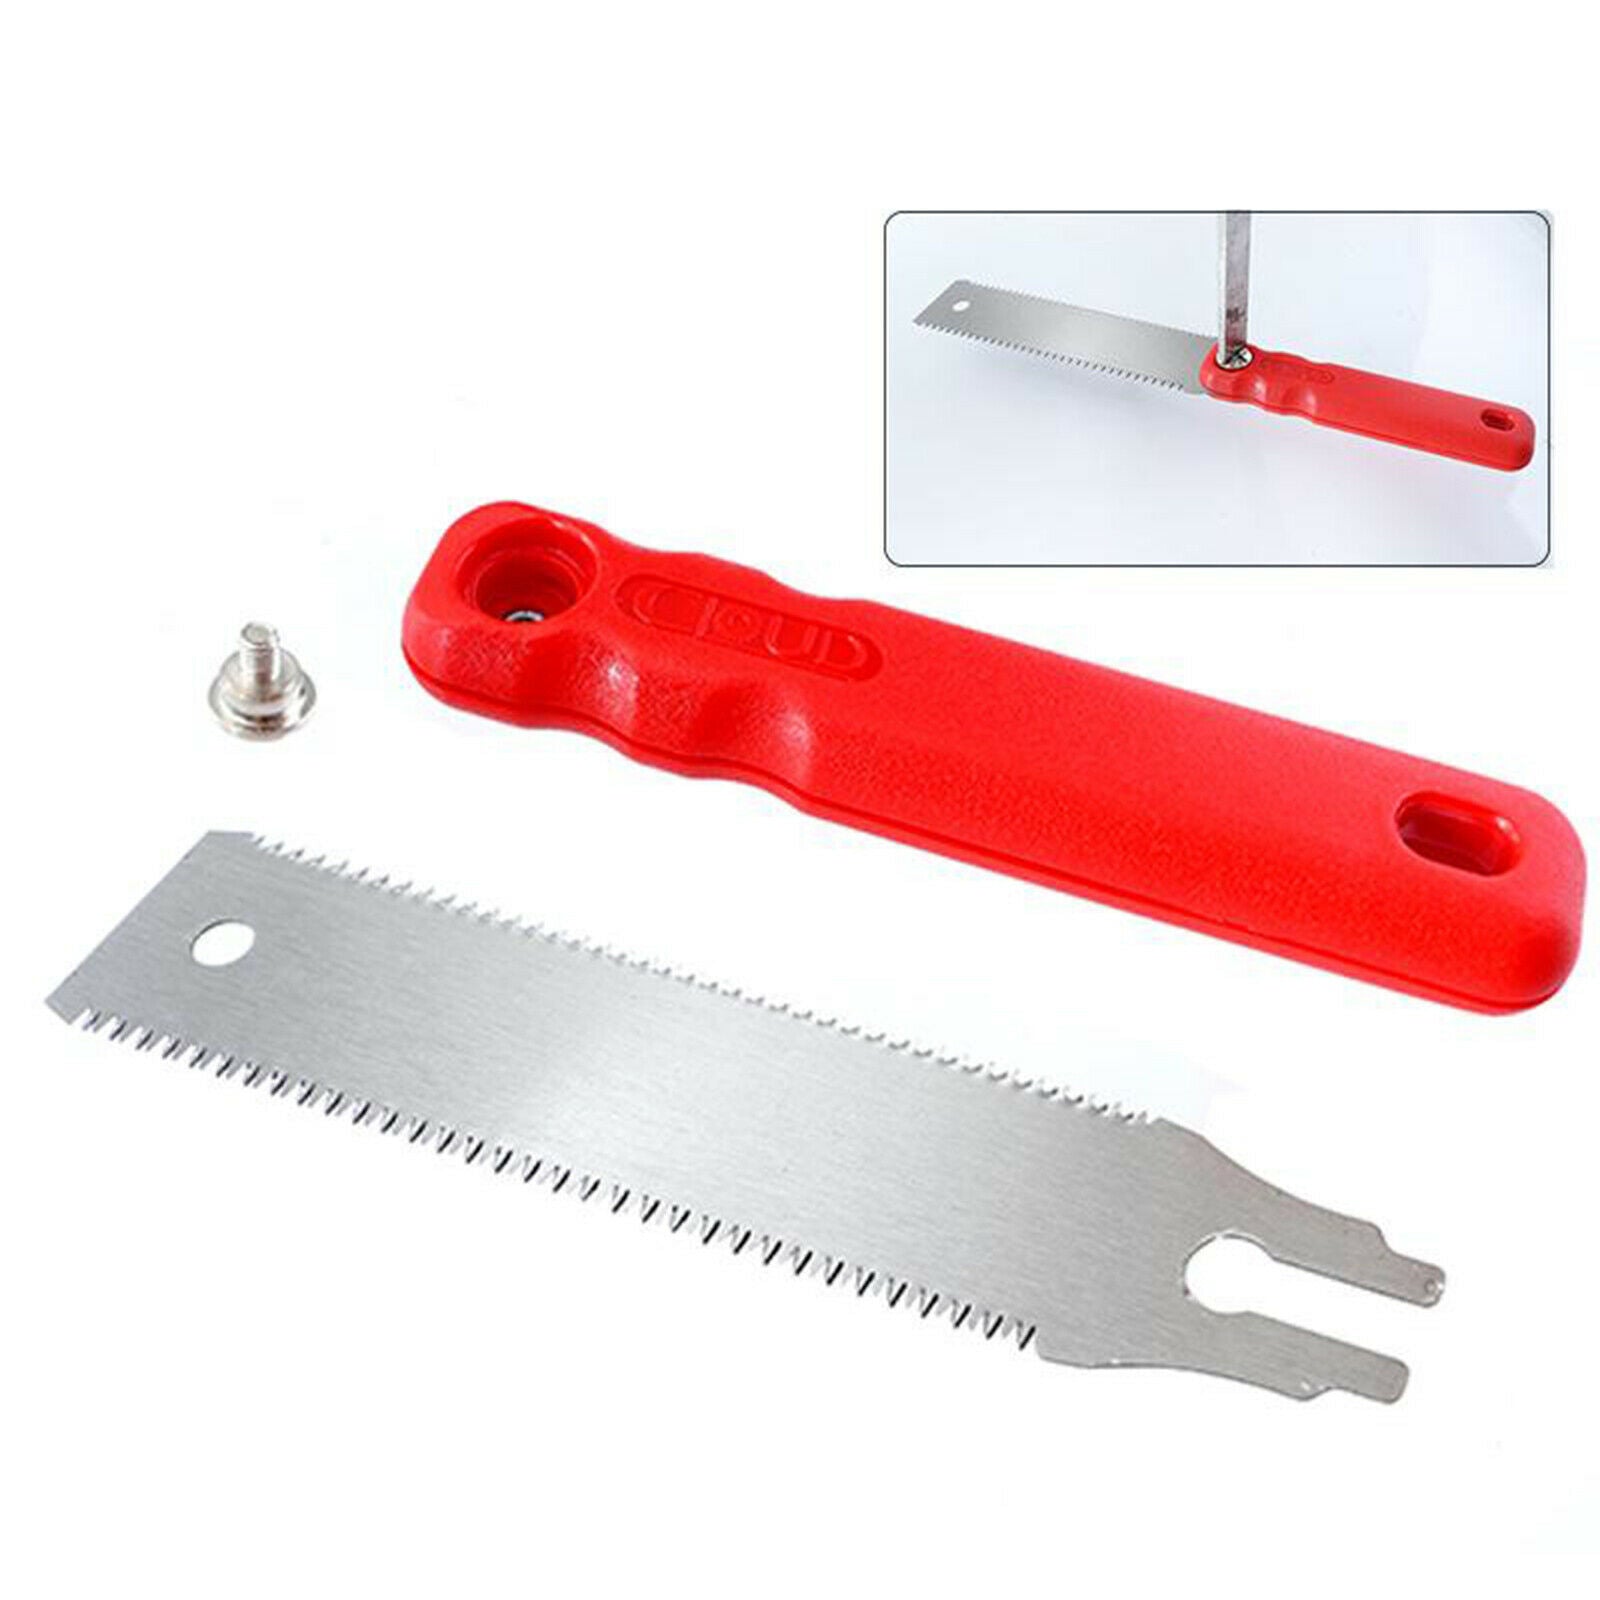 300mm Mini Hand Saws Double Side Flush Cut Saw For Woodworking Garden DIY